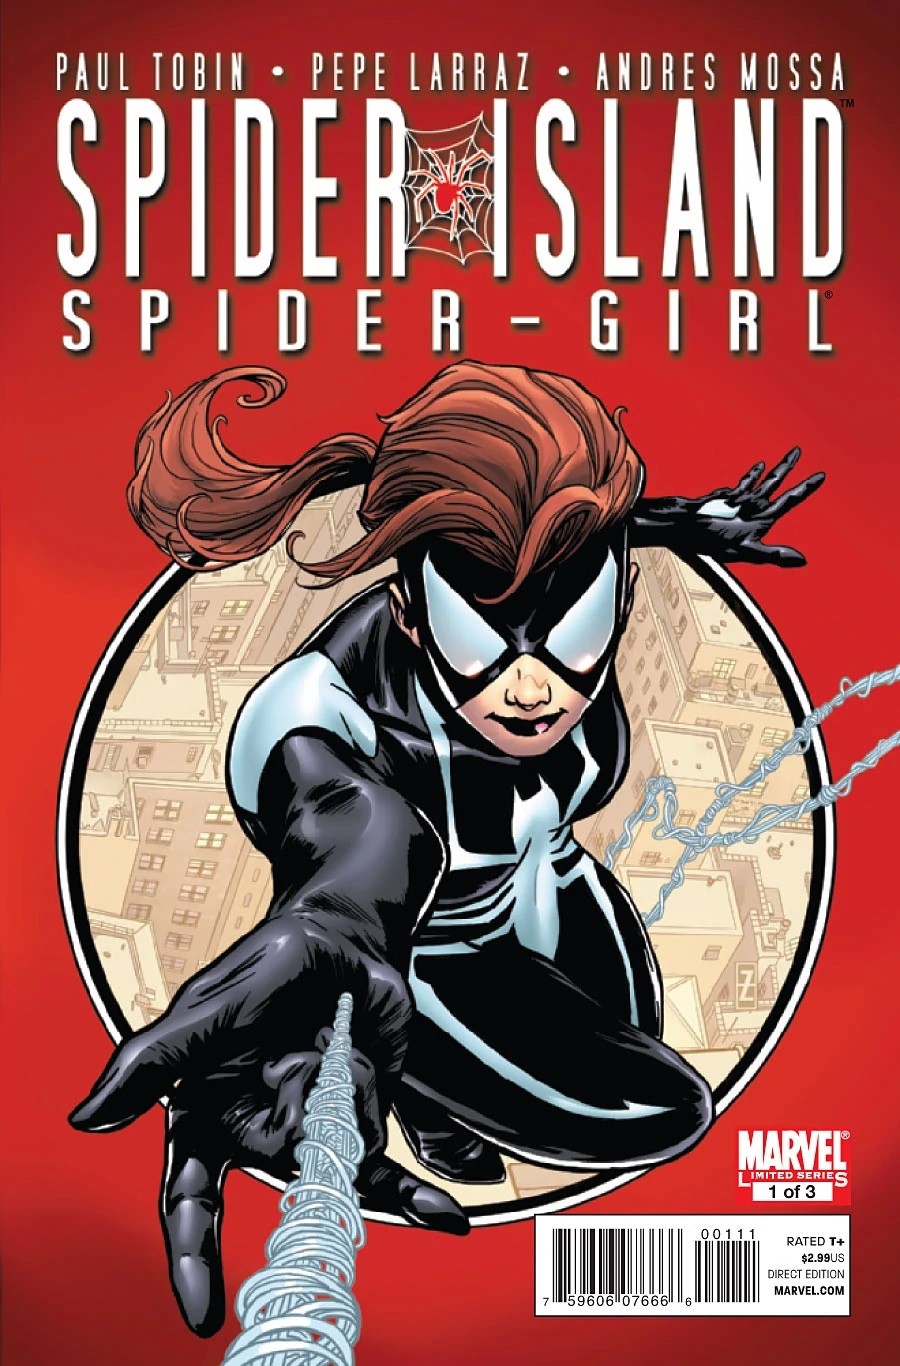 Spider-Island: The Amazing Spider-Girl Limited Series Bundle Issues 1-3